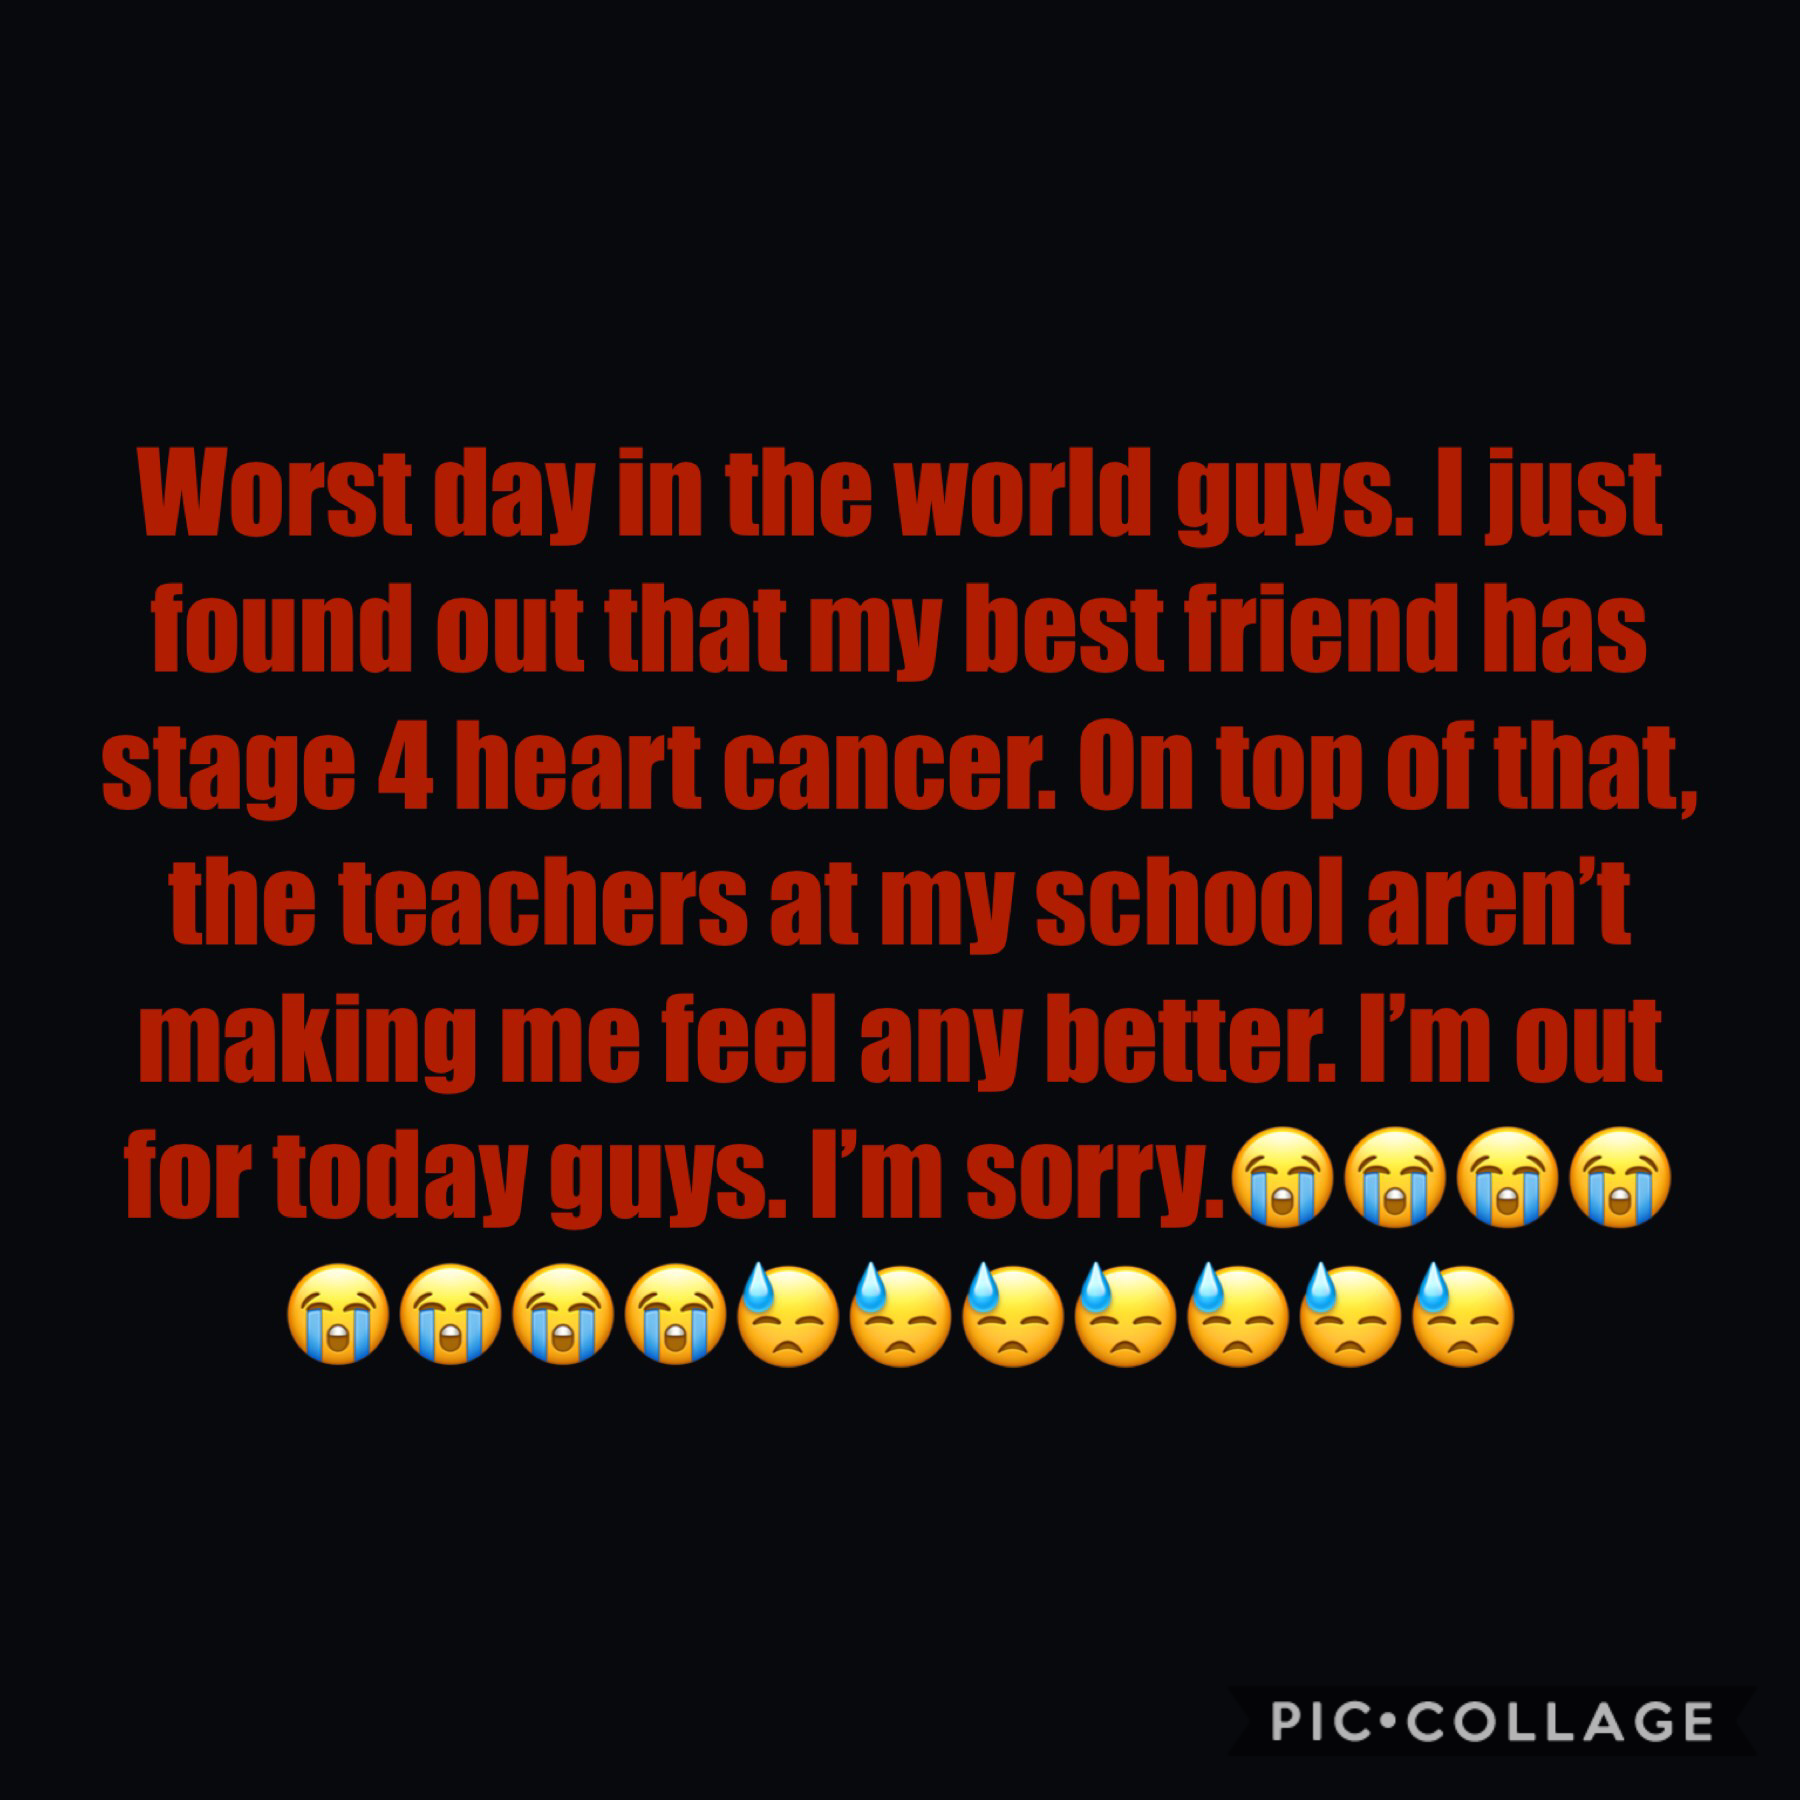 I’m sorry guys. Love you all...